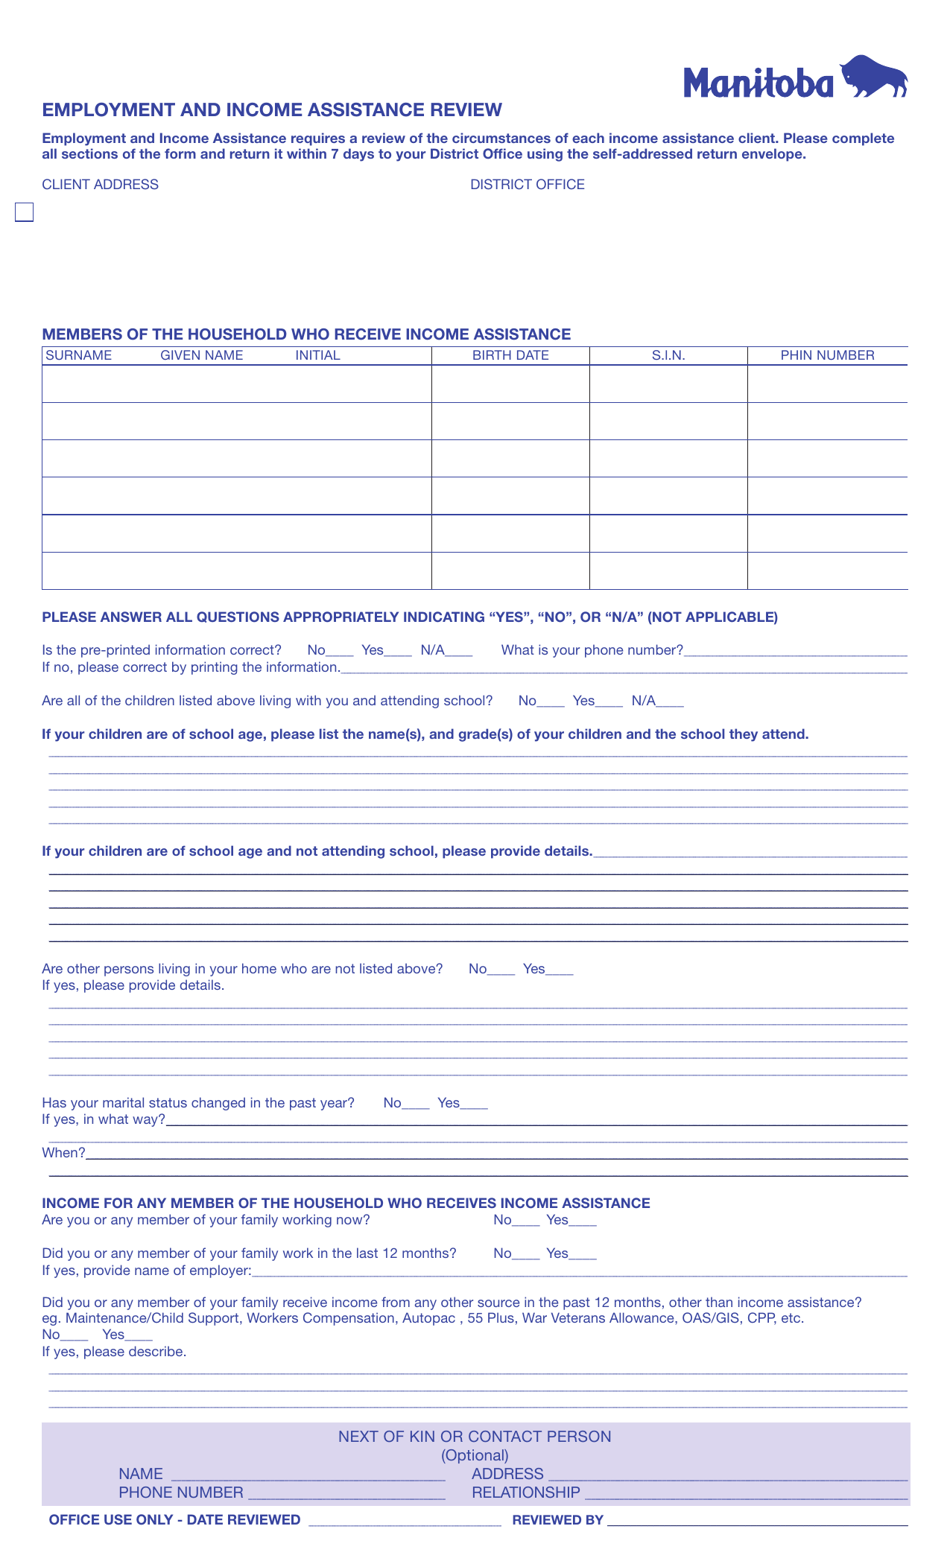 Form MG-99 Employment and Income Assistance Review - Manitoba, Canada, Page 1